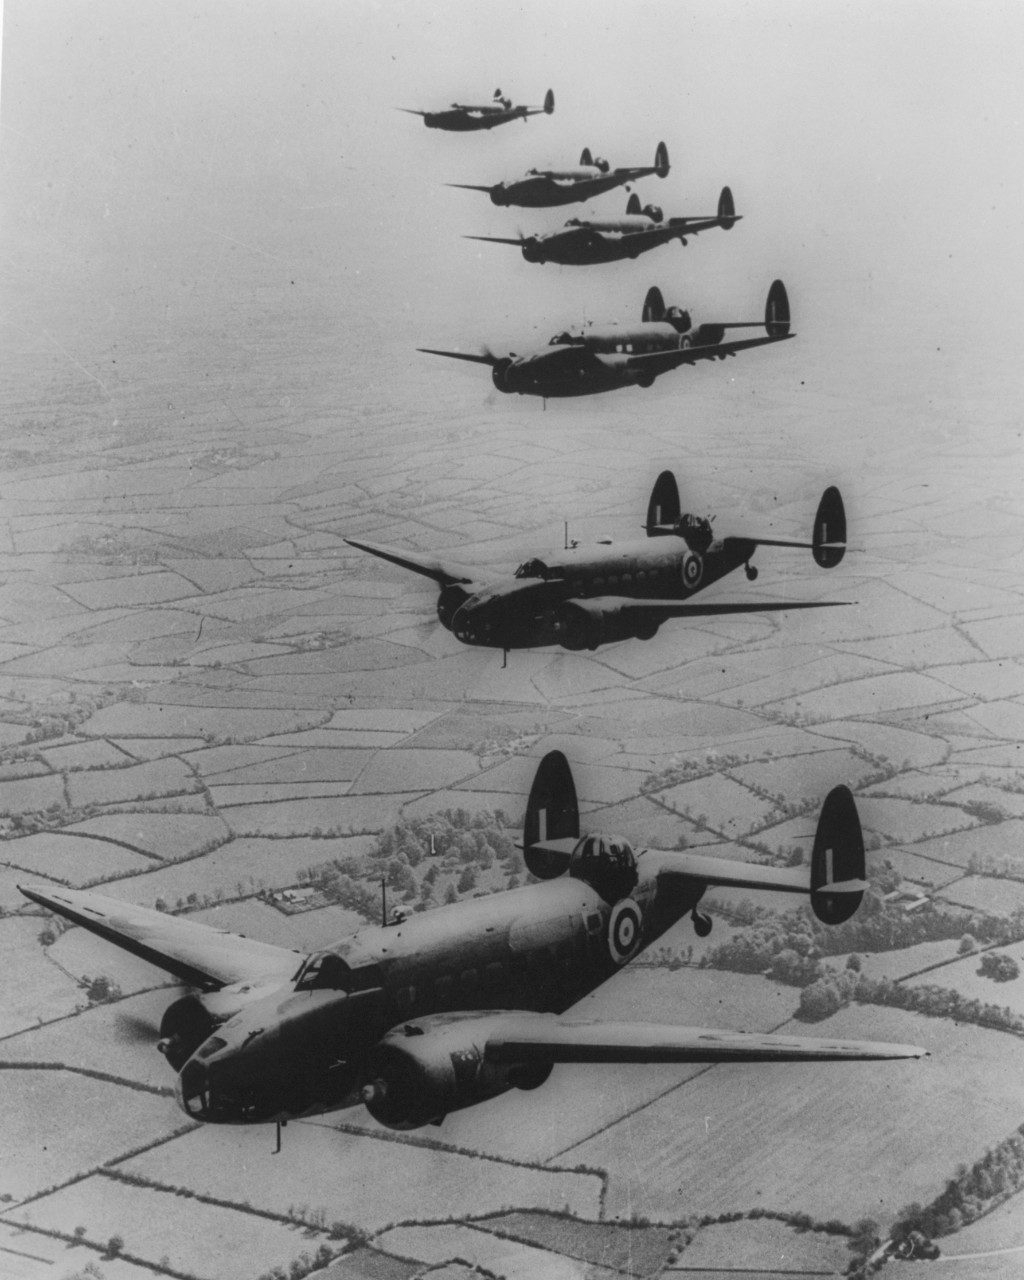 1940  - Formation flight of six Hudson's over England.